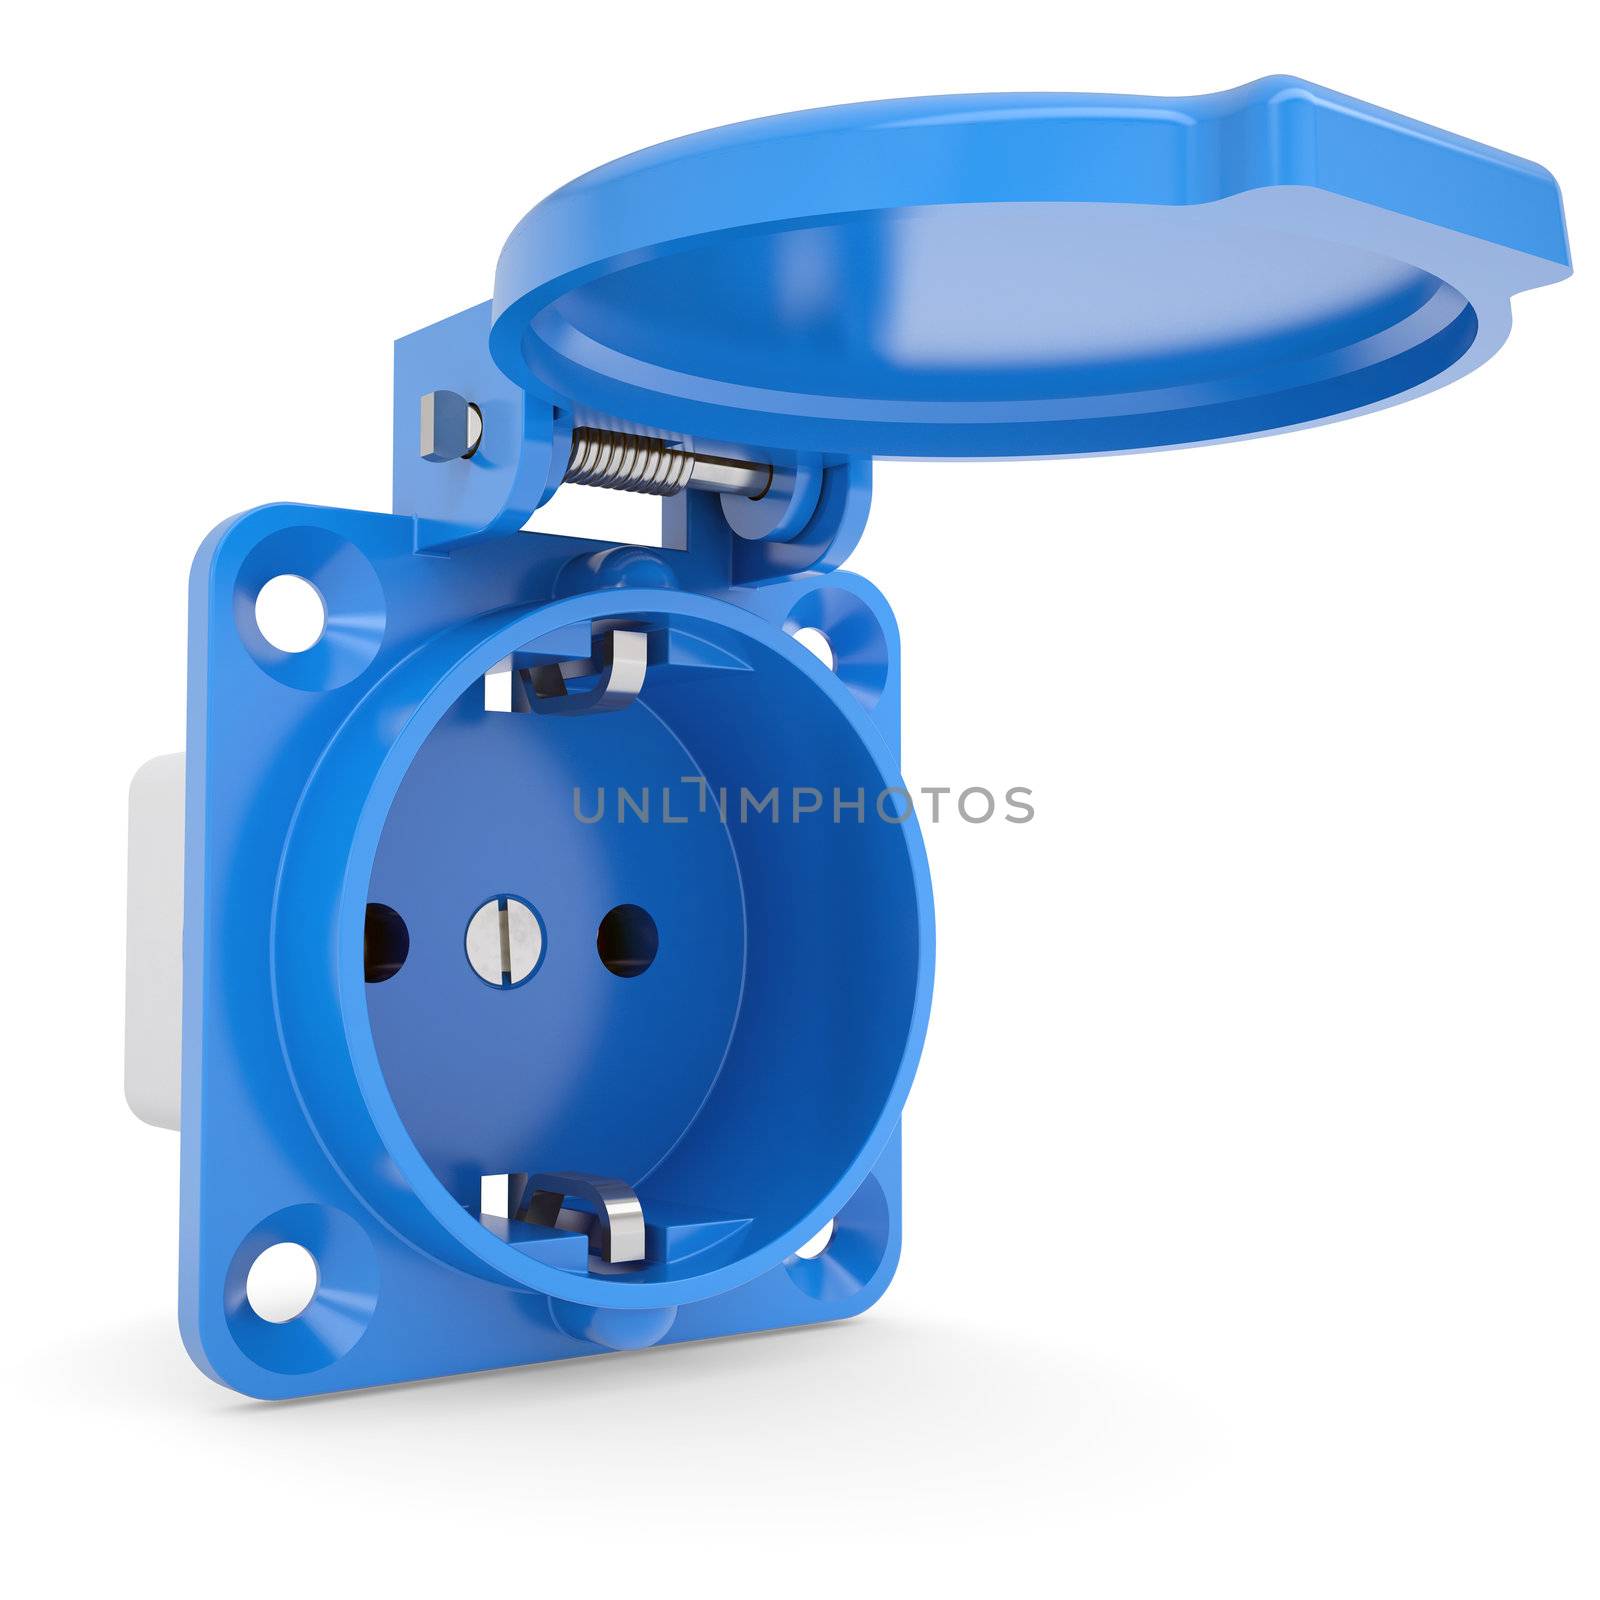 Blue industrial socket. Isolated render on a white background